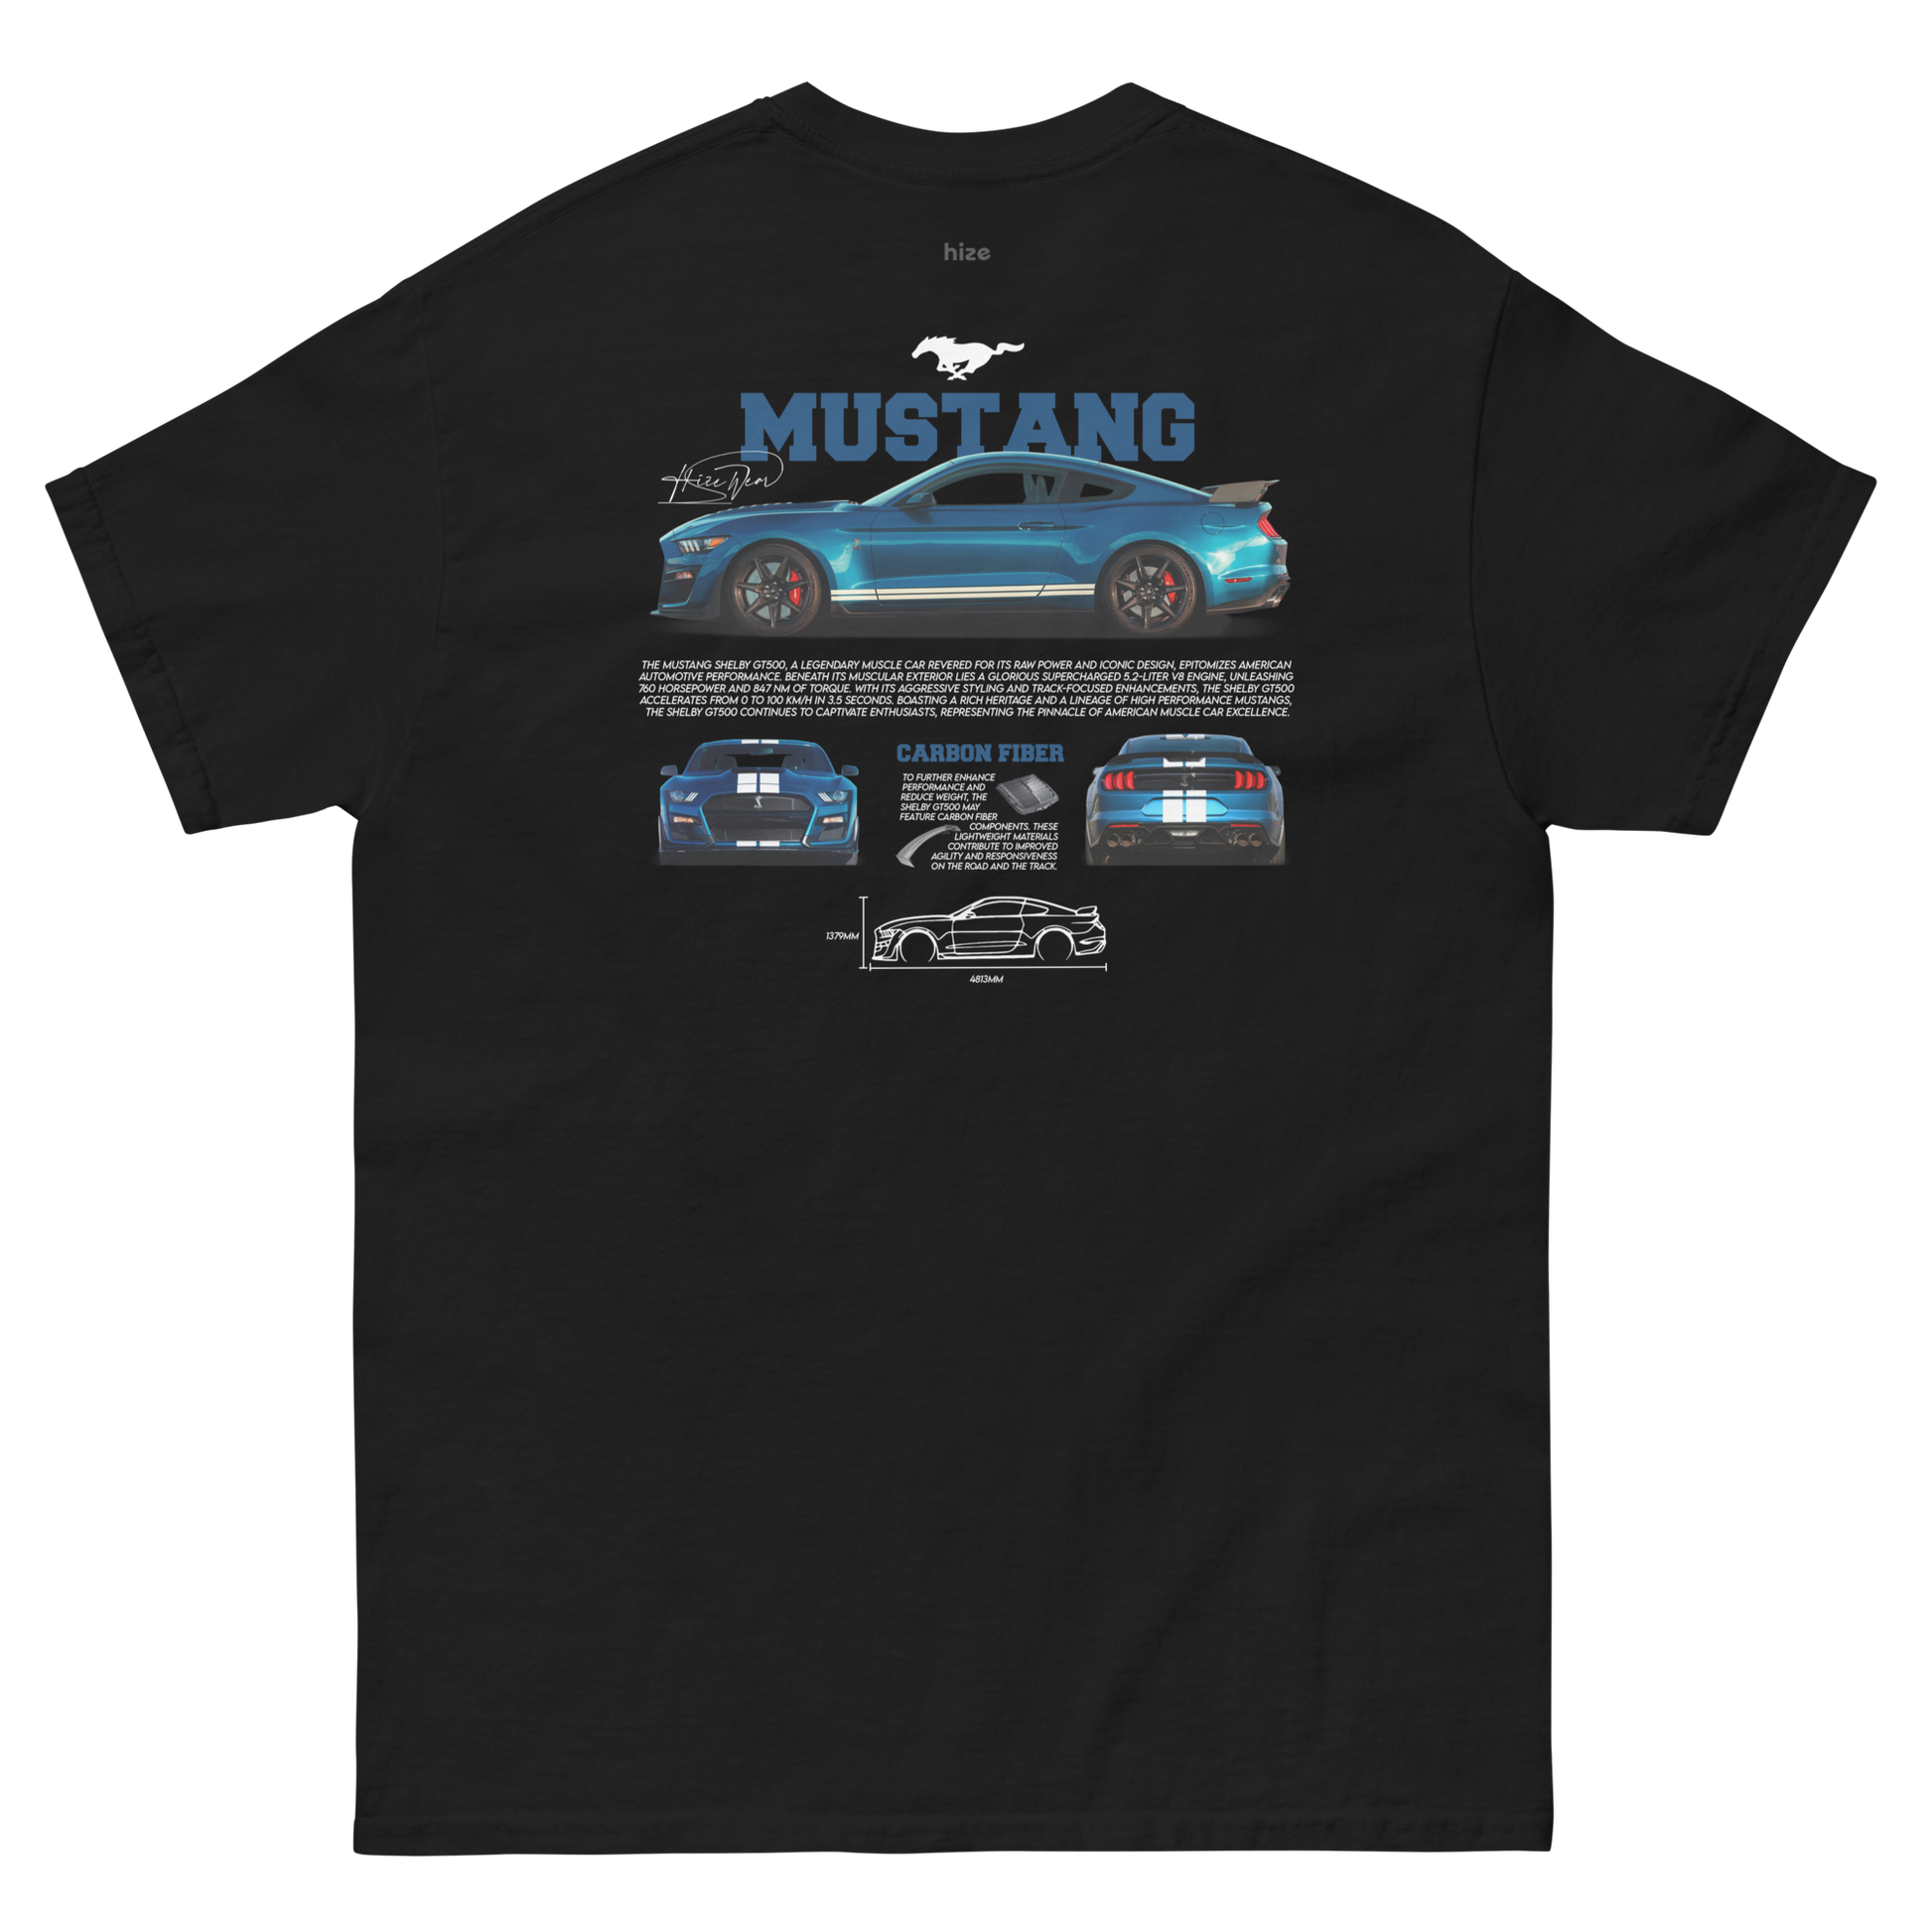 Ford Mustang Shelby GT500 T-shirt - Black Back View